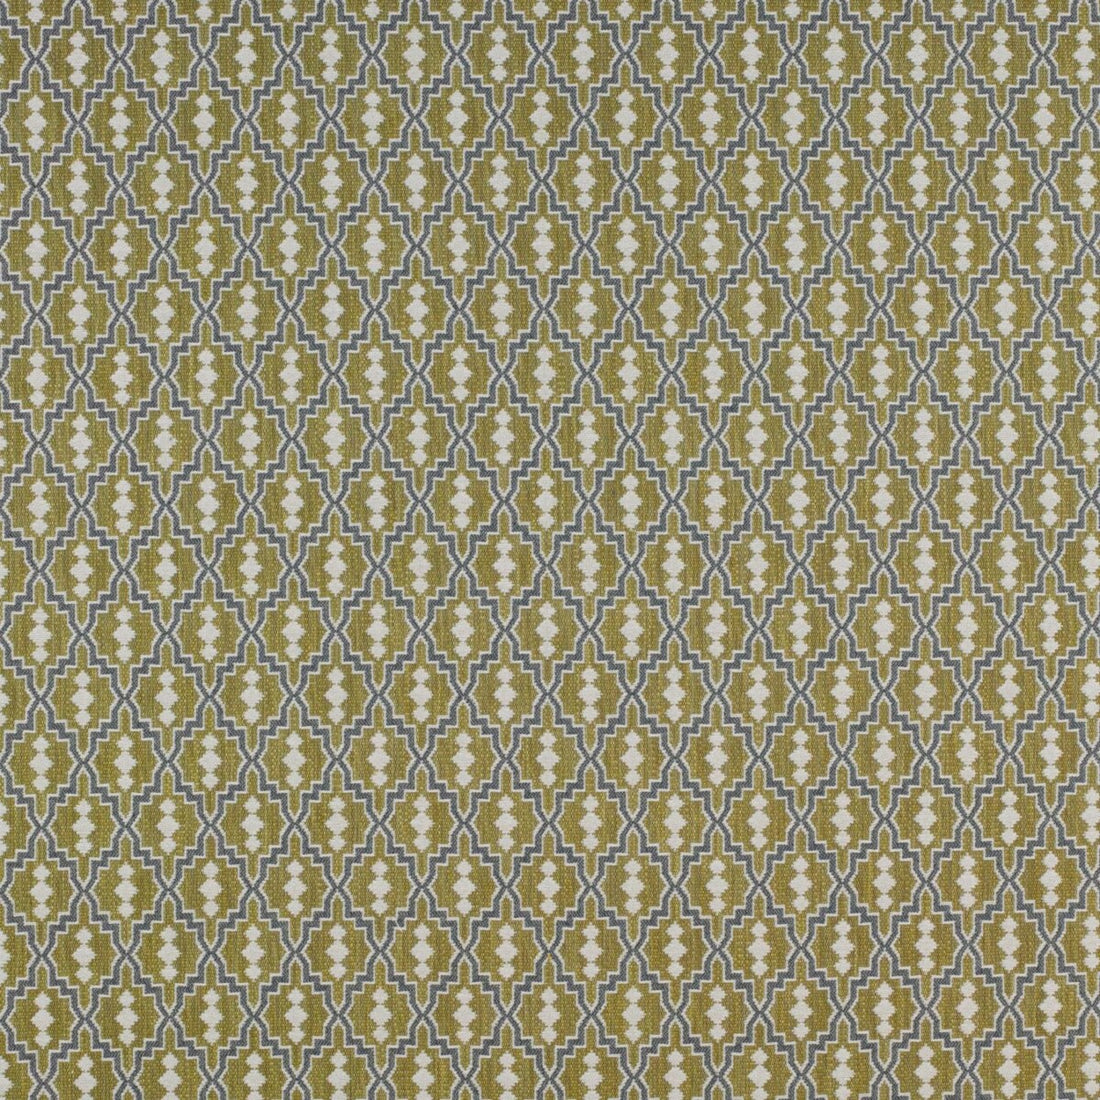 Aztec fabric in verde lima color - pattern GDT5152.004.0 - by Gaston y Daniela in the Gaston Uptown collection